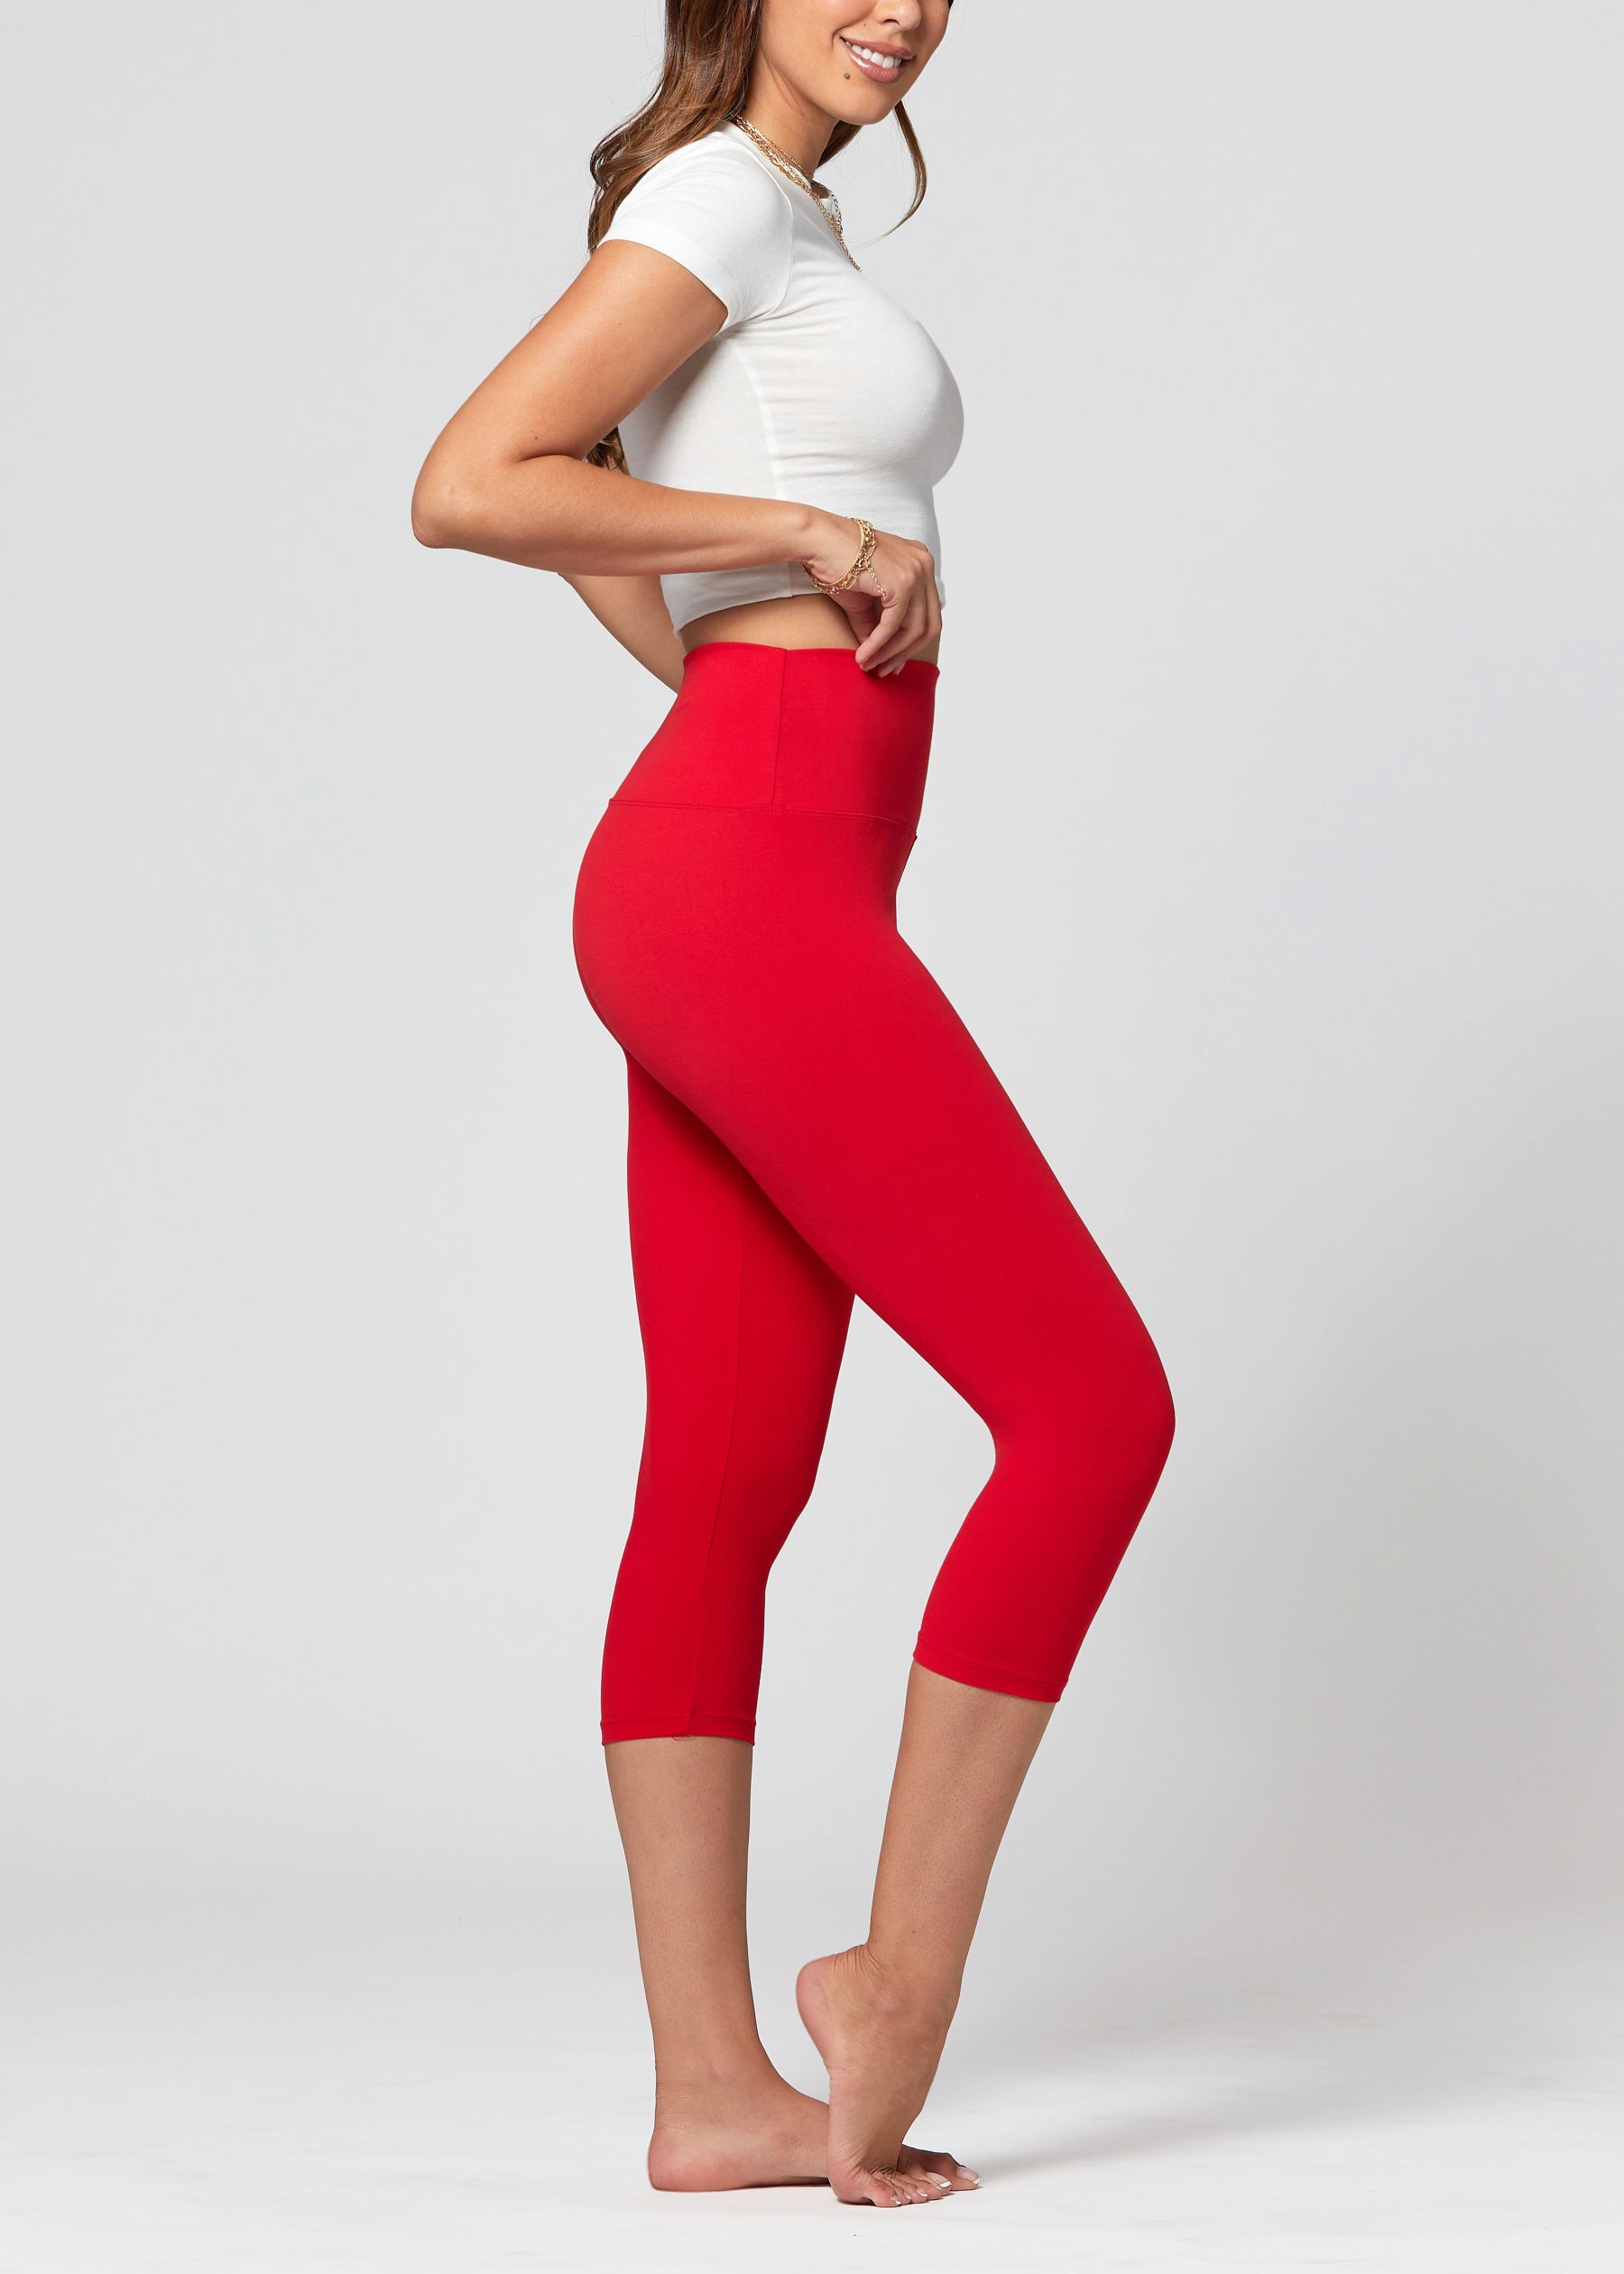 Conceited Women's Ivy Buttery Soft High Waist Basic Leggings